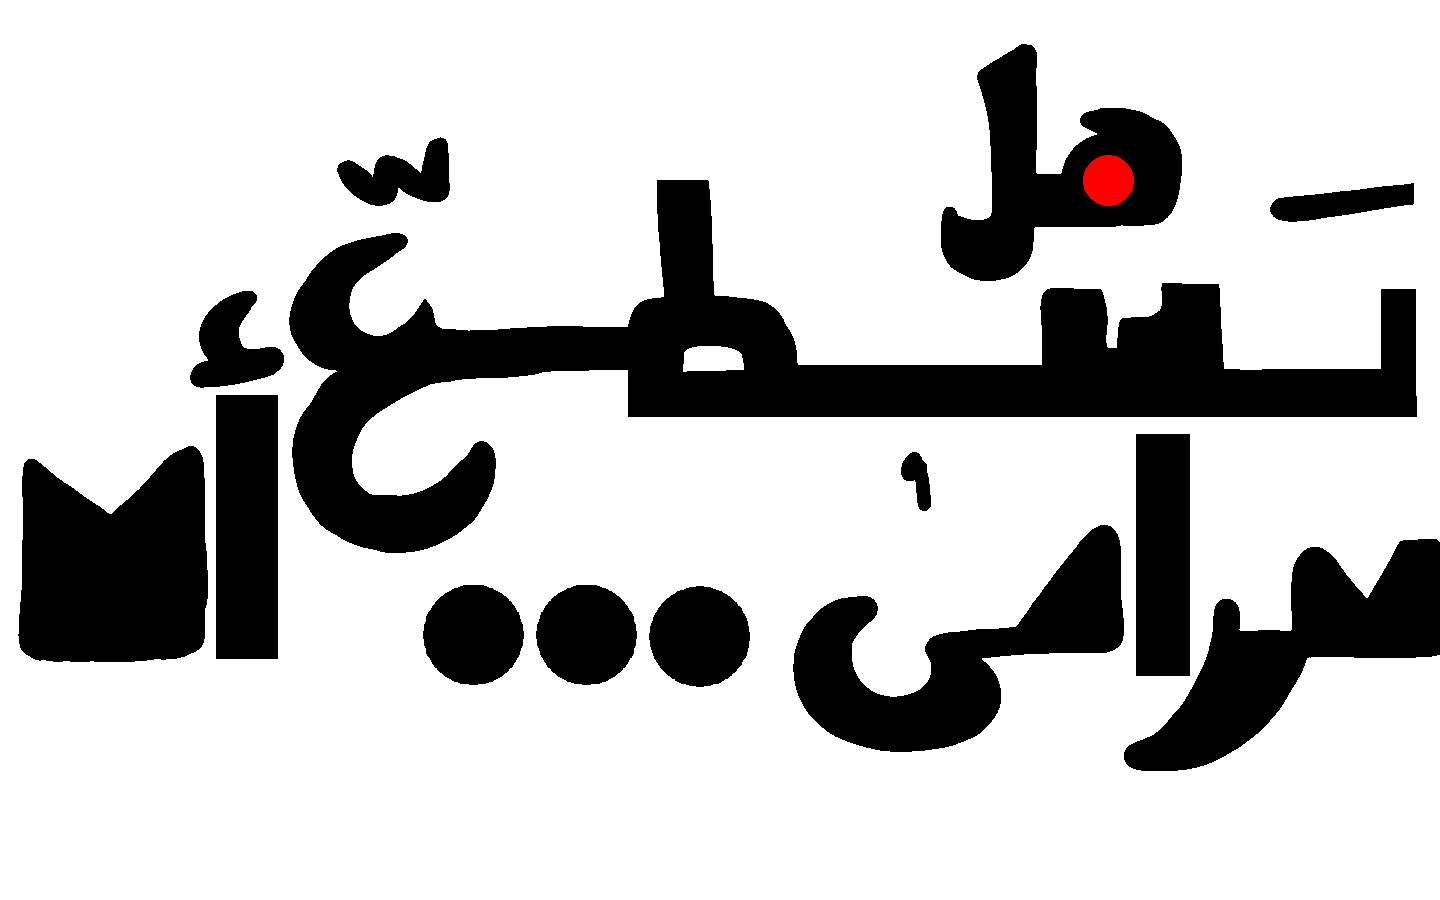 This is a header image in arabic language. It is translated to: Can you see me? The font is divided into this main image and accompanied by 10 animated images representing the dots within the arabic font